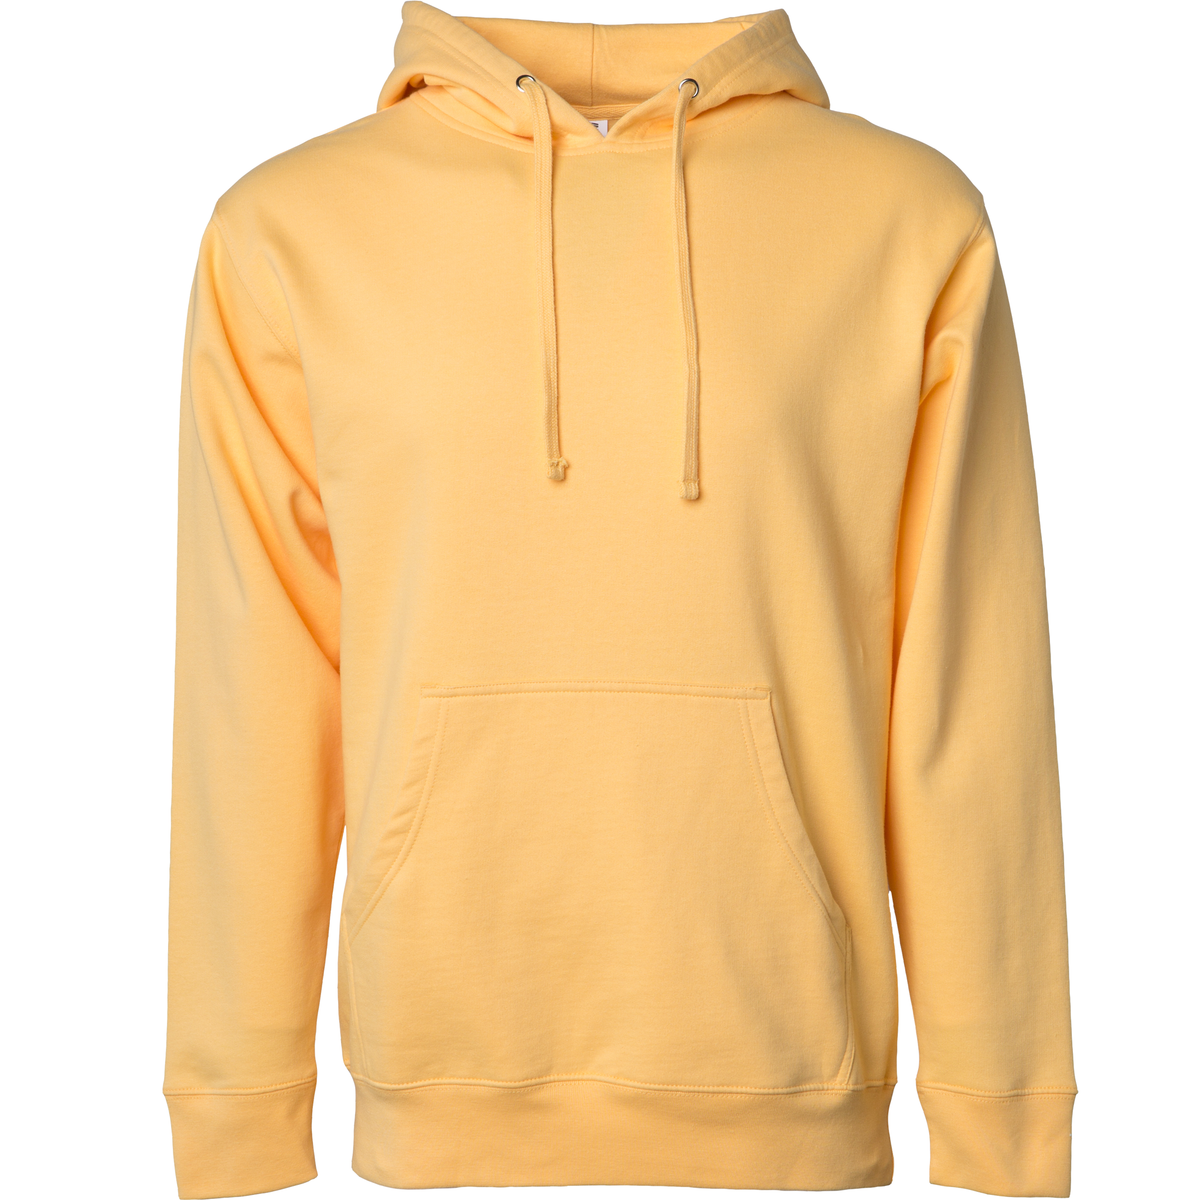 SS4500 #4 - Midweight Hooded Pullover Sweatshirt